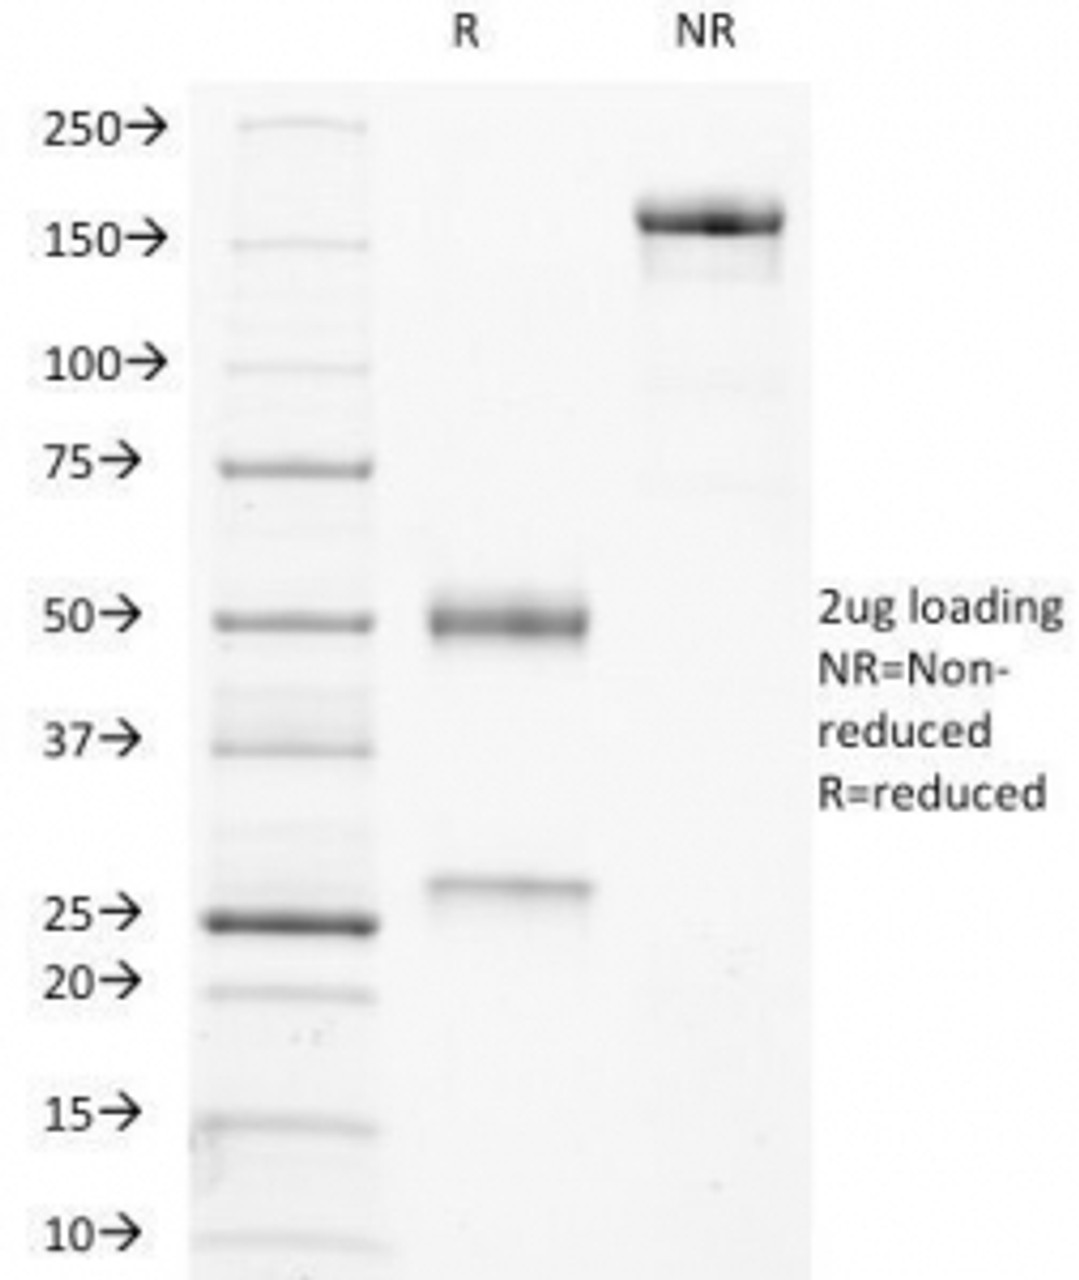 SDS-PAGE Analysis of Purified, BSA-Free TRAcP Antibody (ACP5/1070) . Confirmation of Integrity and Purity of the Antibody.